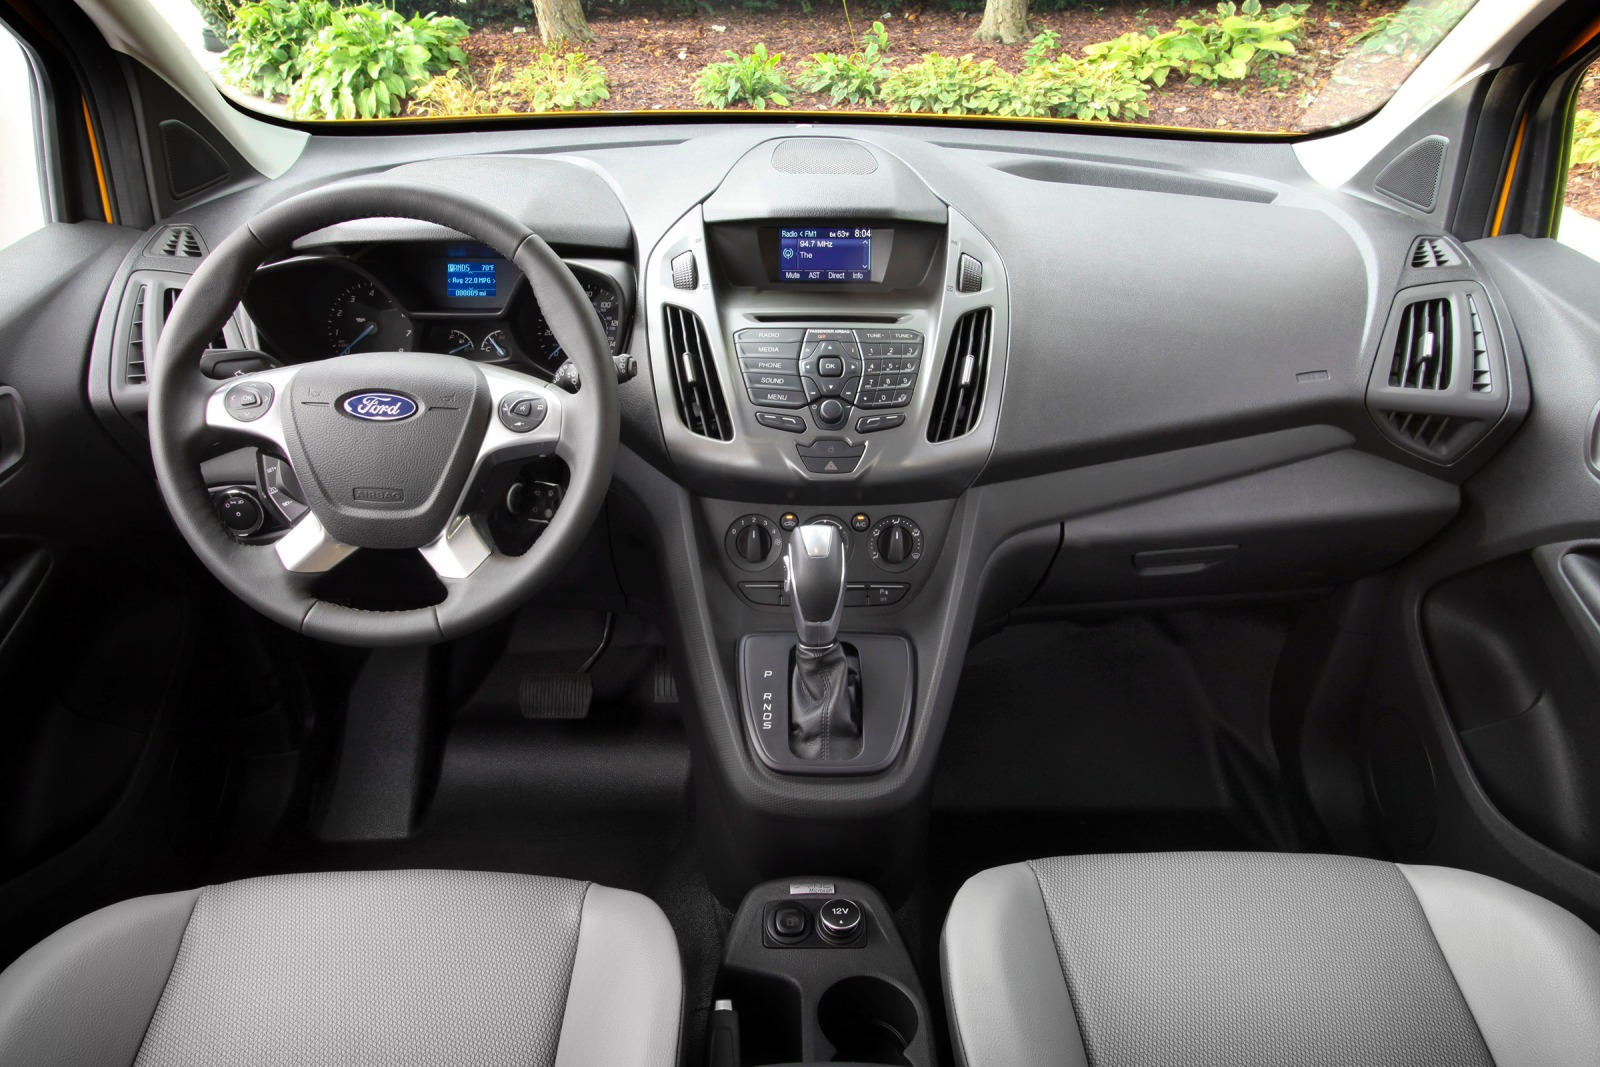 2014 Ford Transit Connect Cargo Van Dashboard